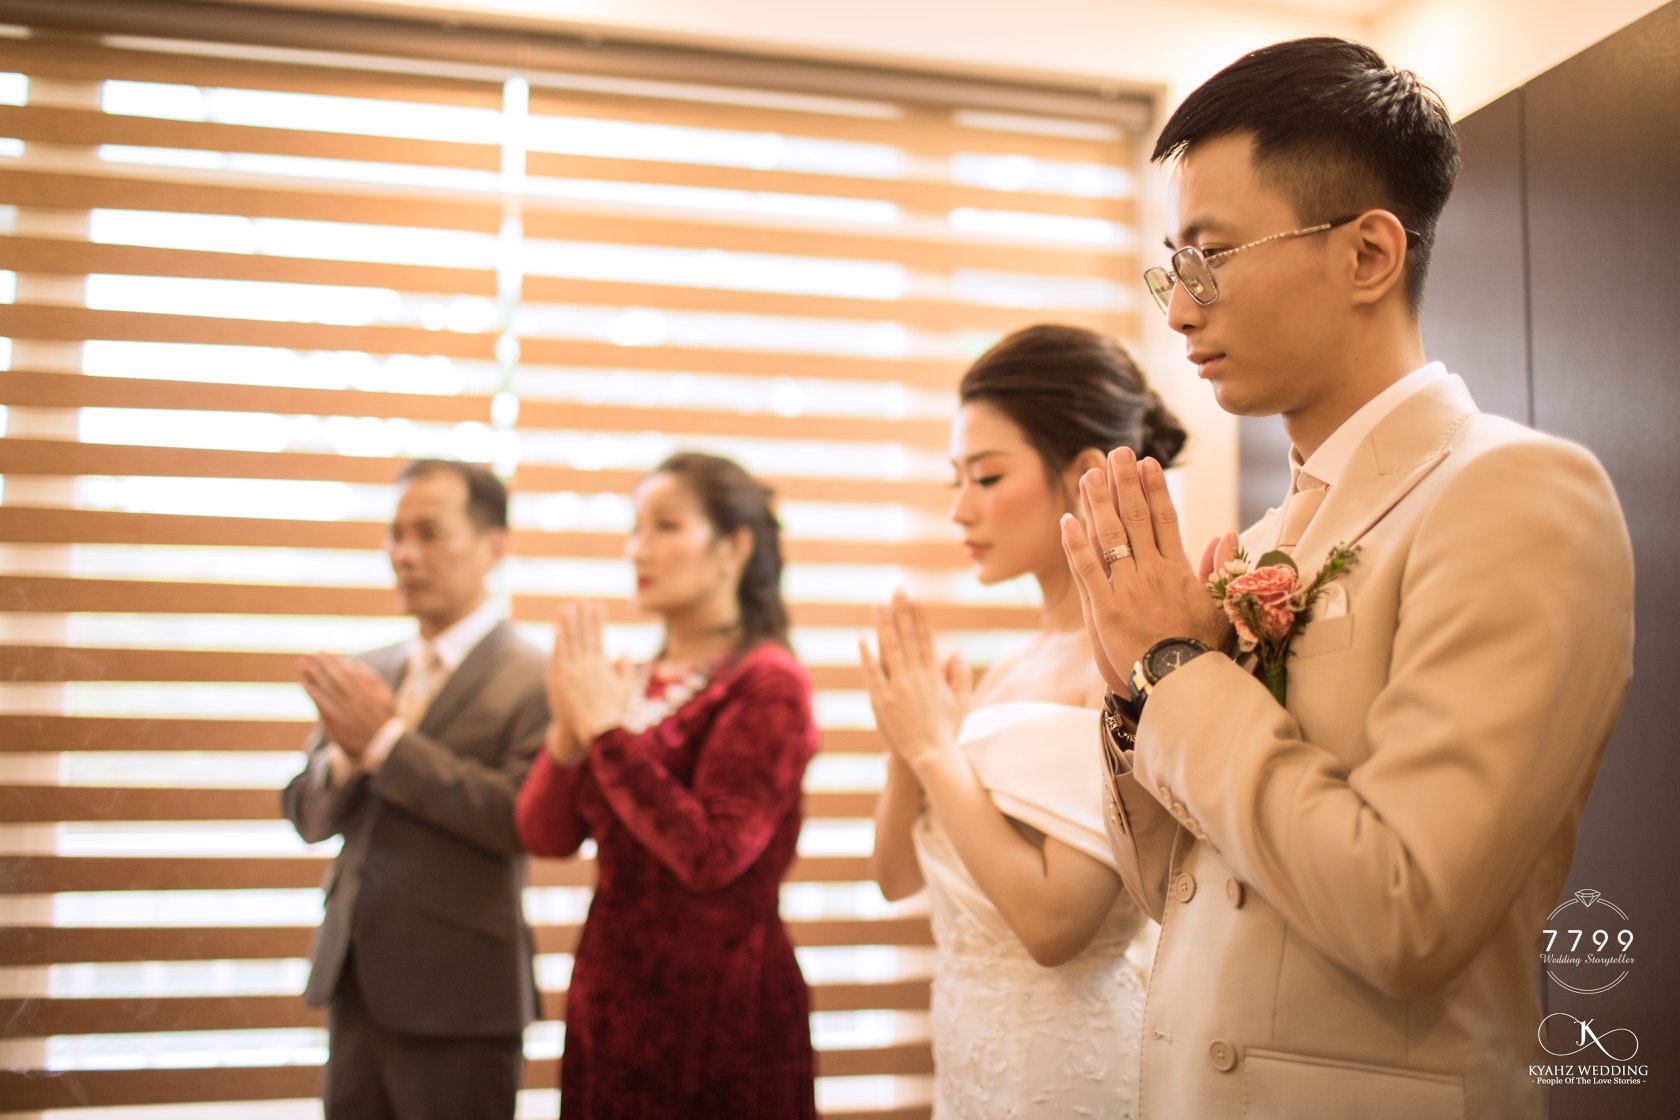 [ CEREMONY PREVIEW ] Rhymastic & Thanh Huyền